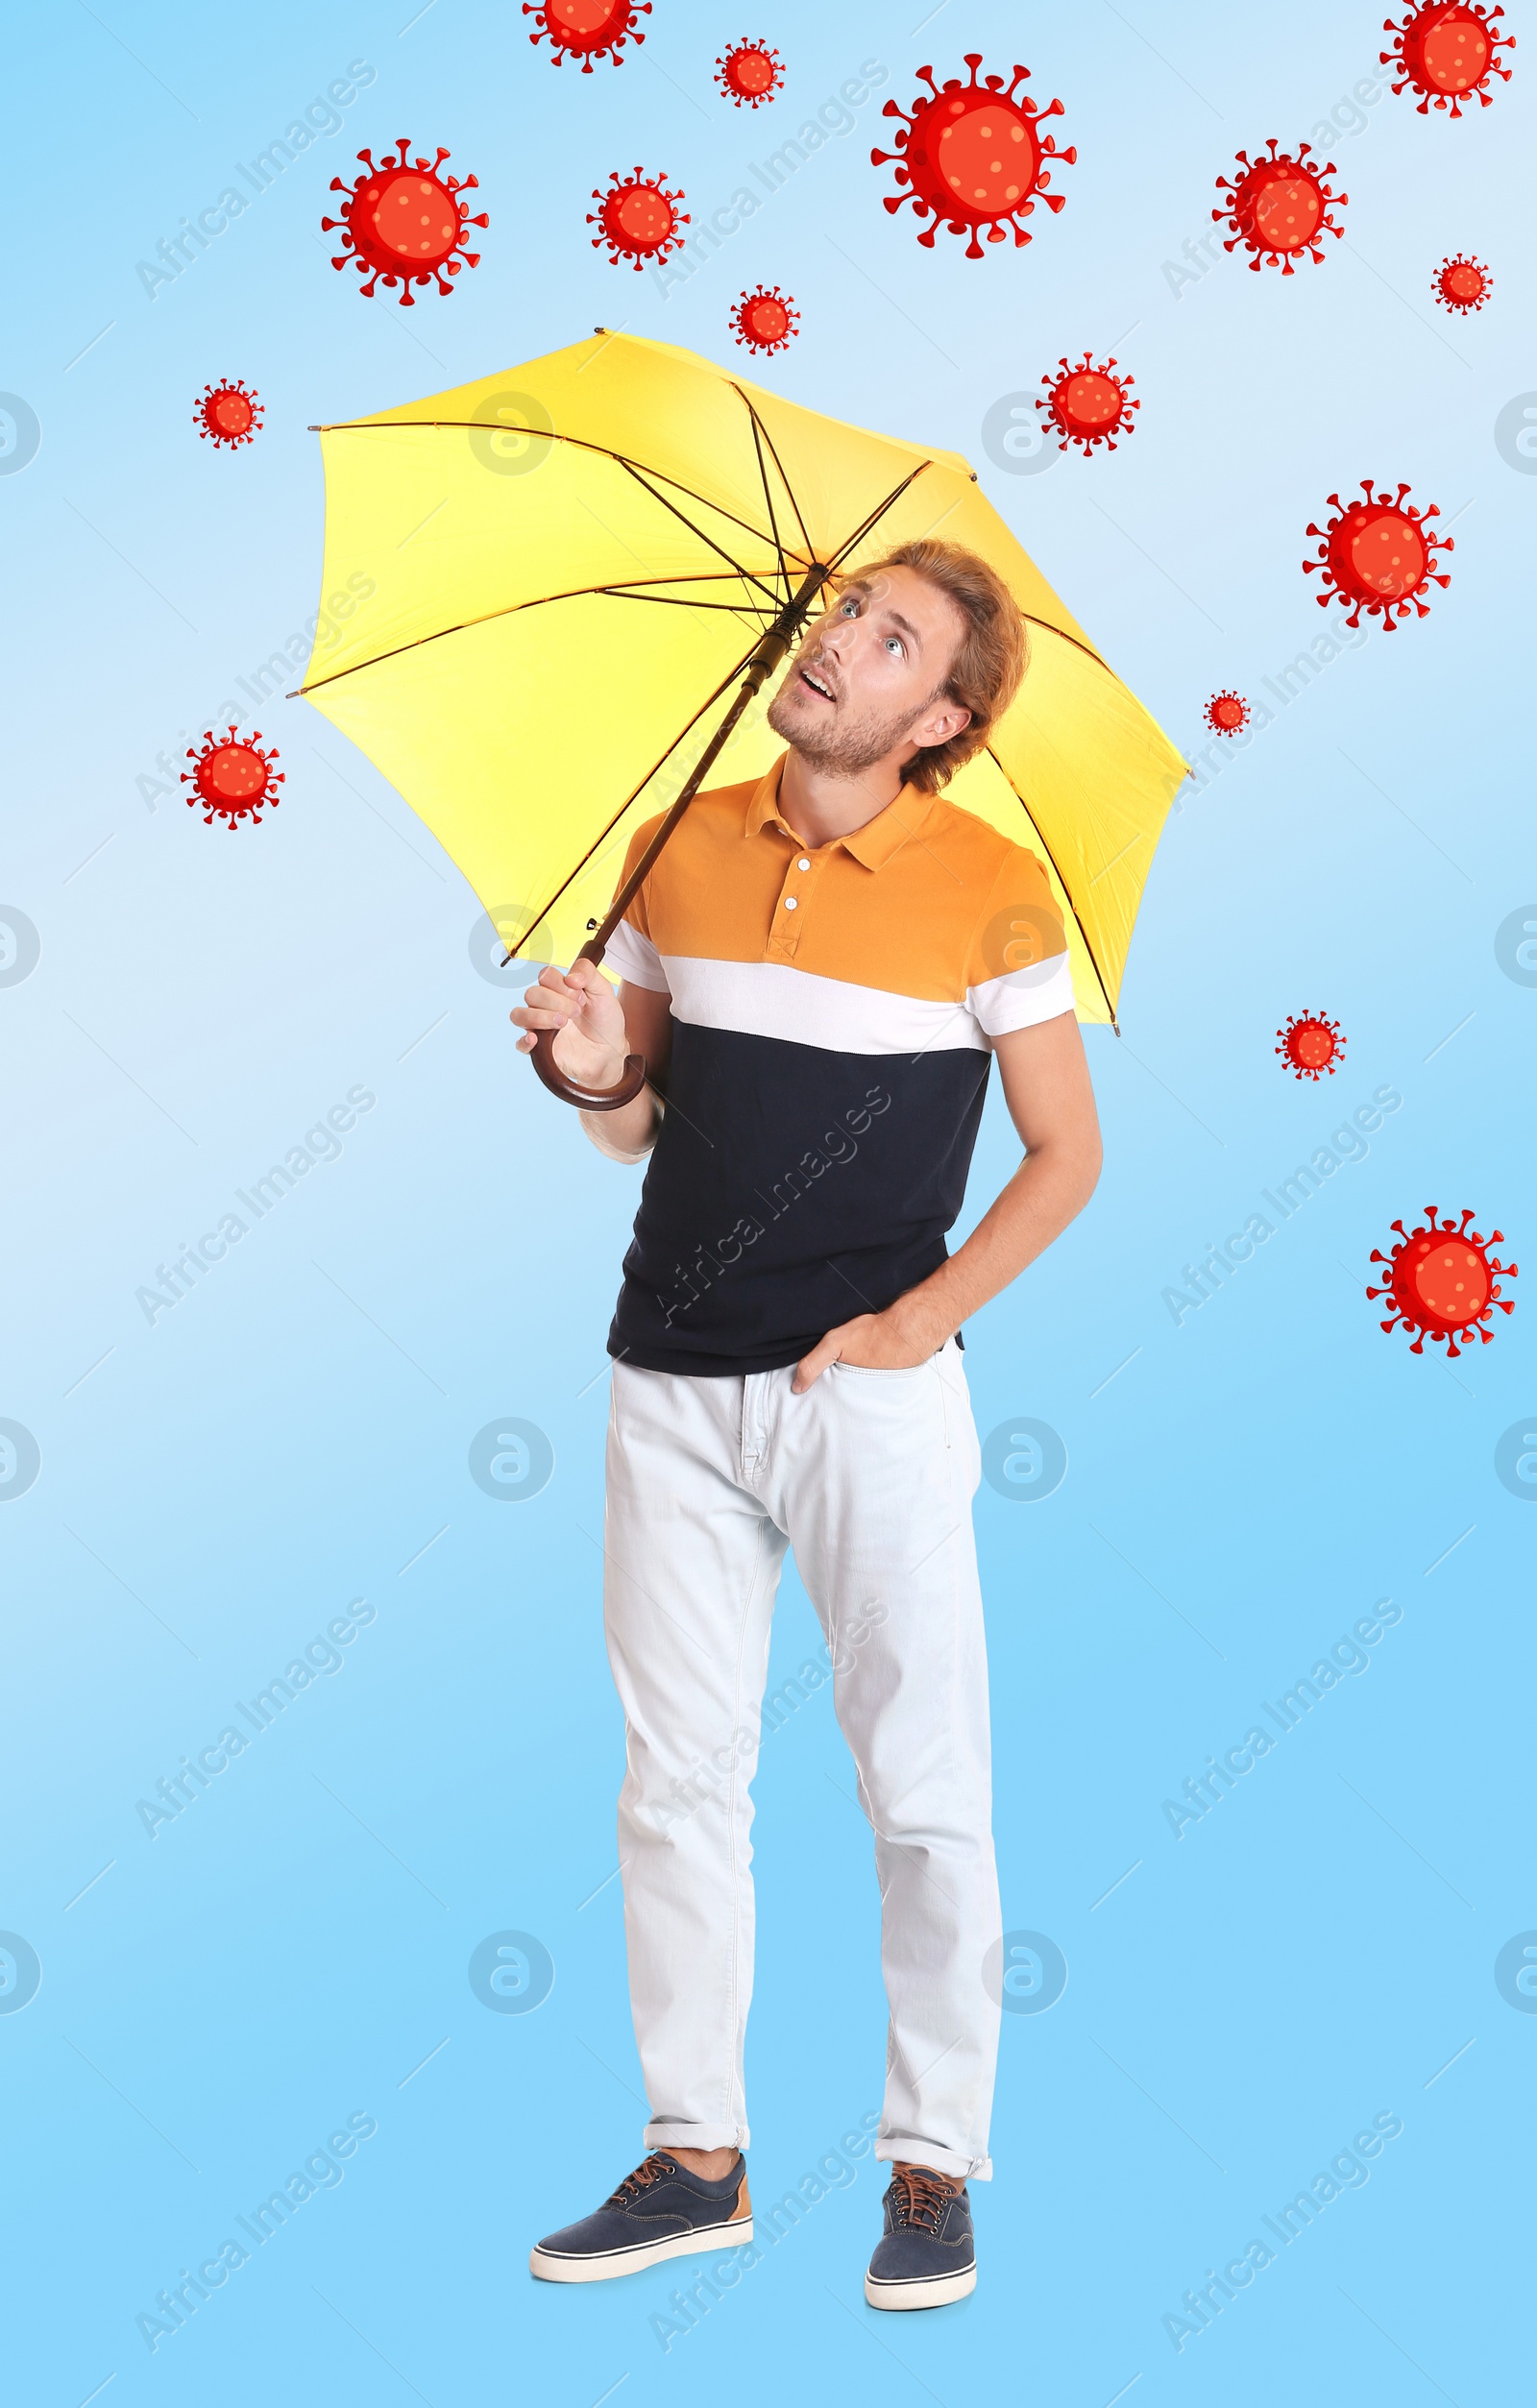 Image of Man protecting himself from viruses with yellow umbrella as symbol of strong immunity